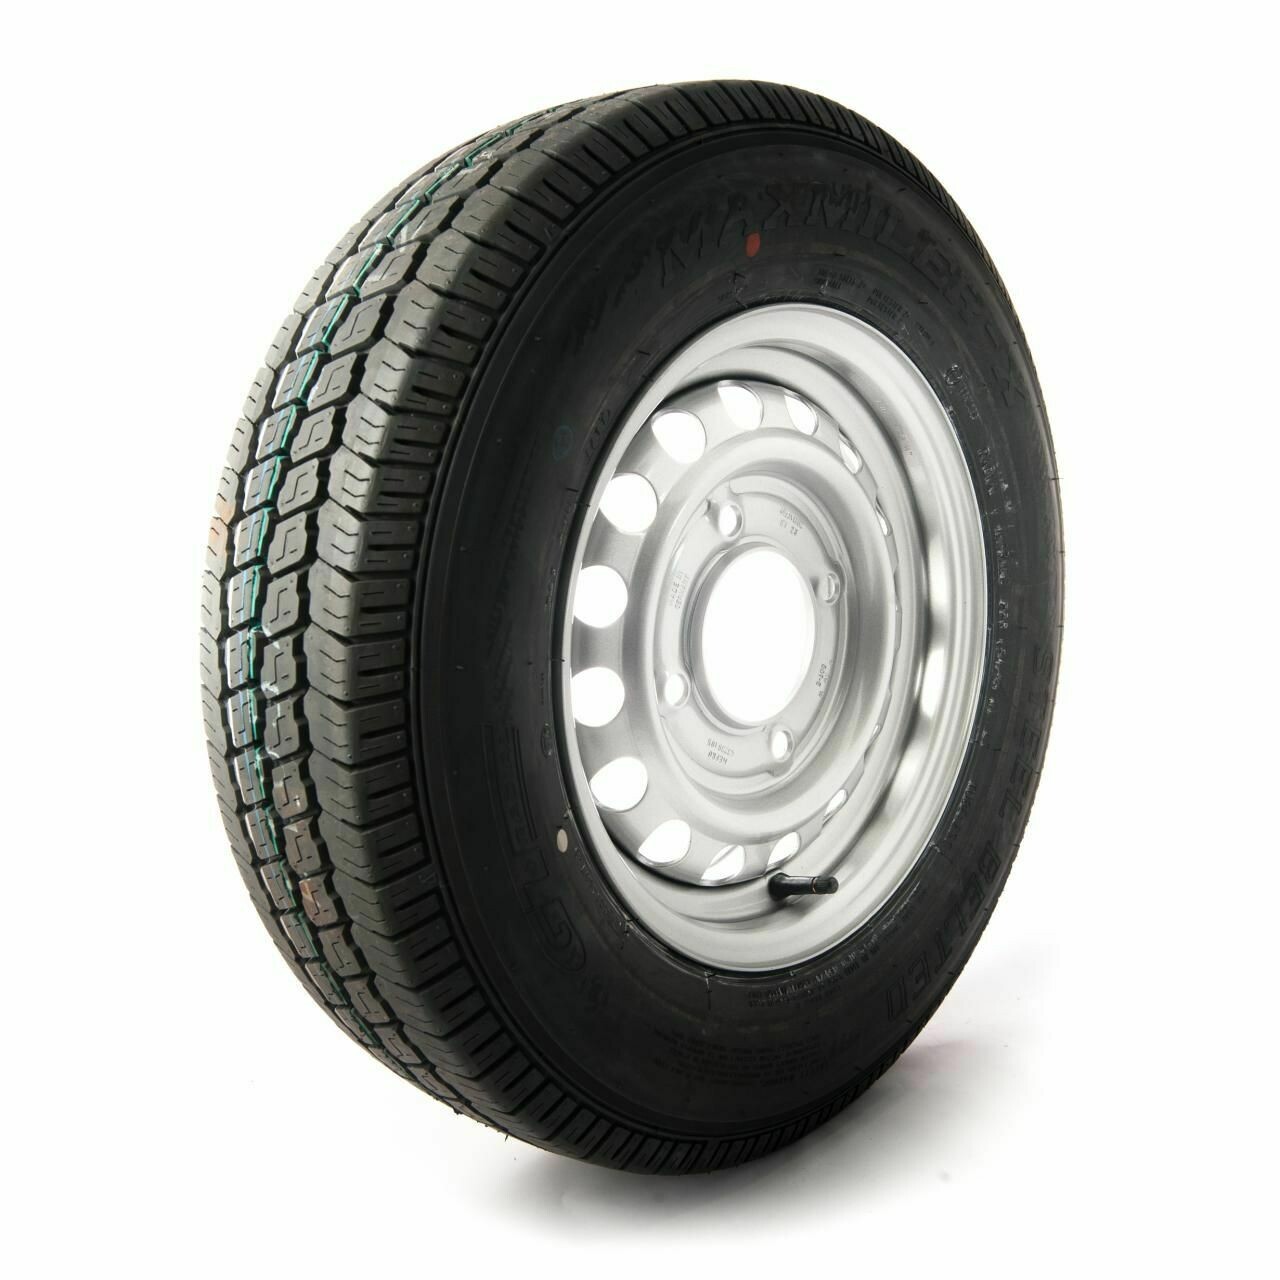 155 R 13 (4 x 5.5 inch pcd) trailer wheel and tyre